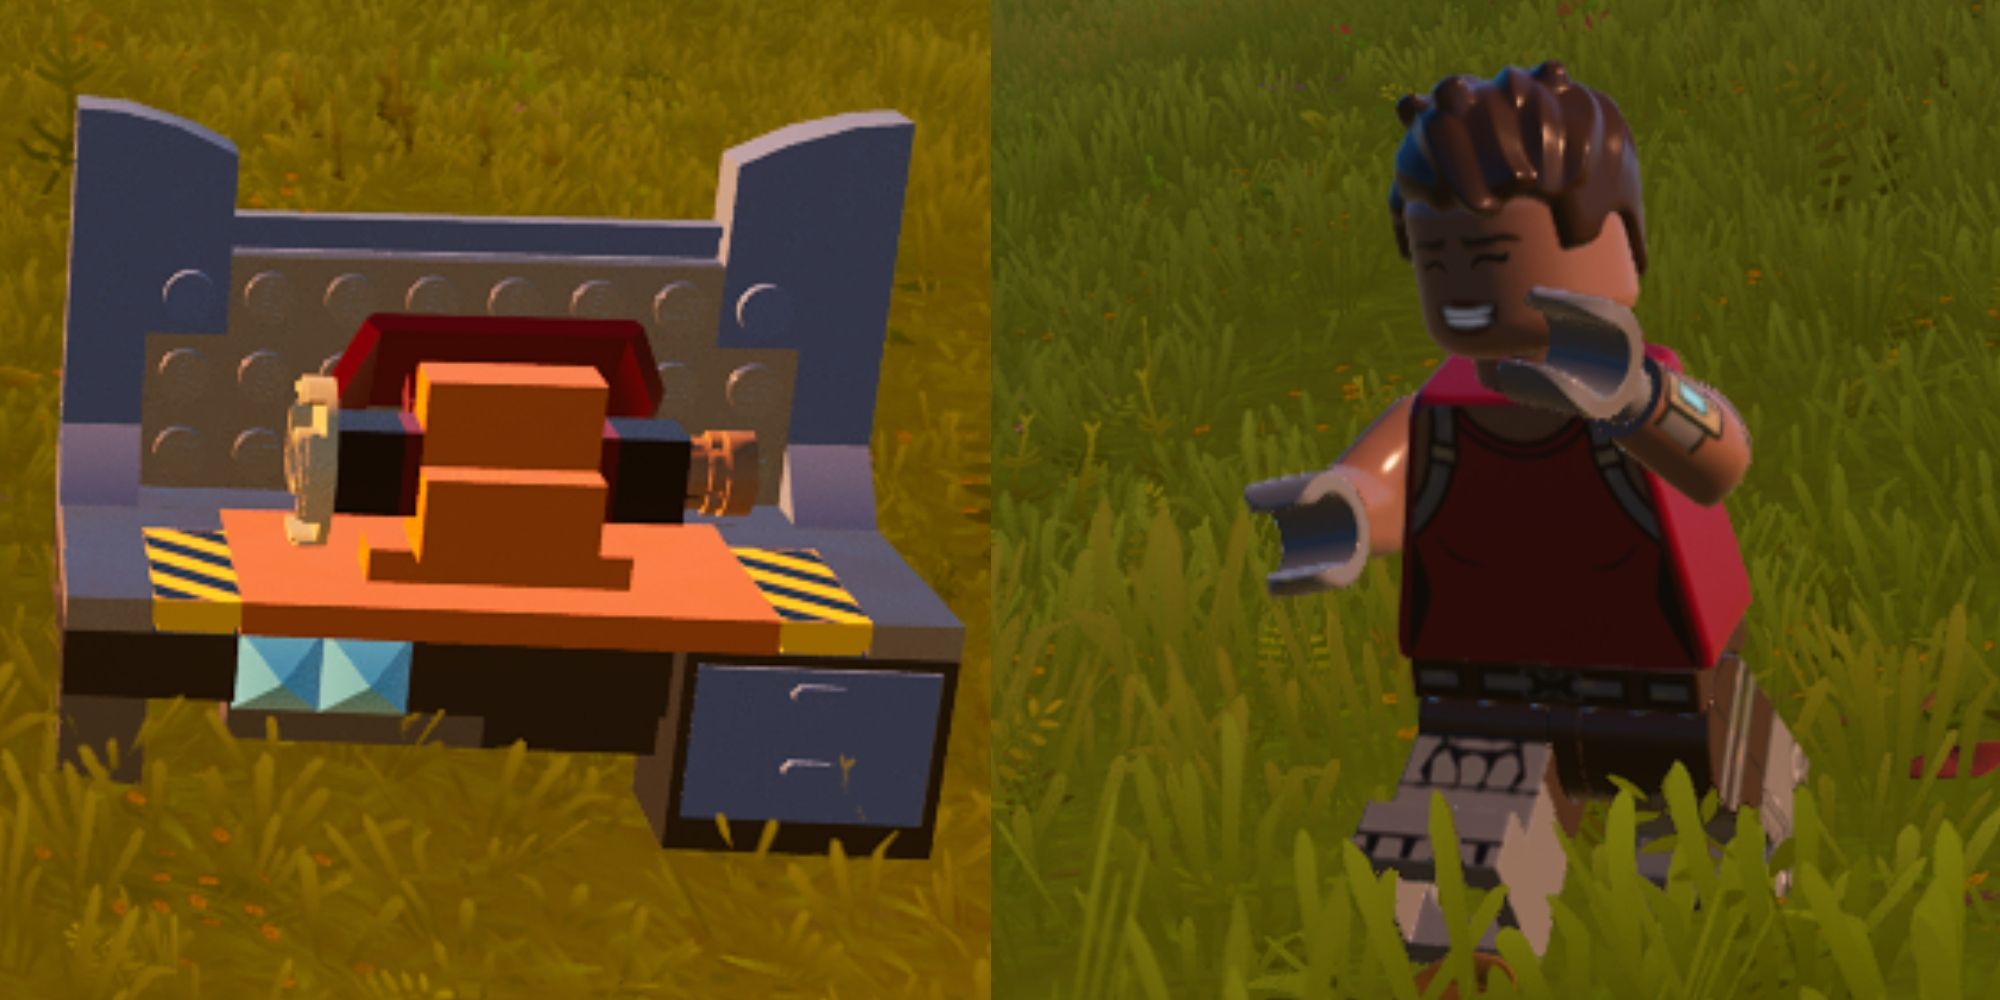 Lego Fortnite Epic Crafting Bench and Lego Player Emoting